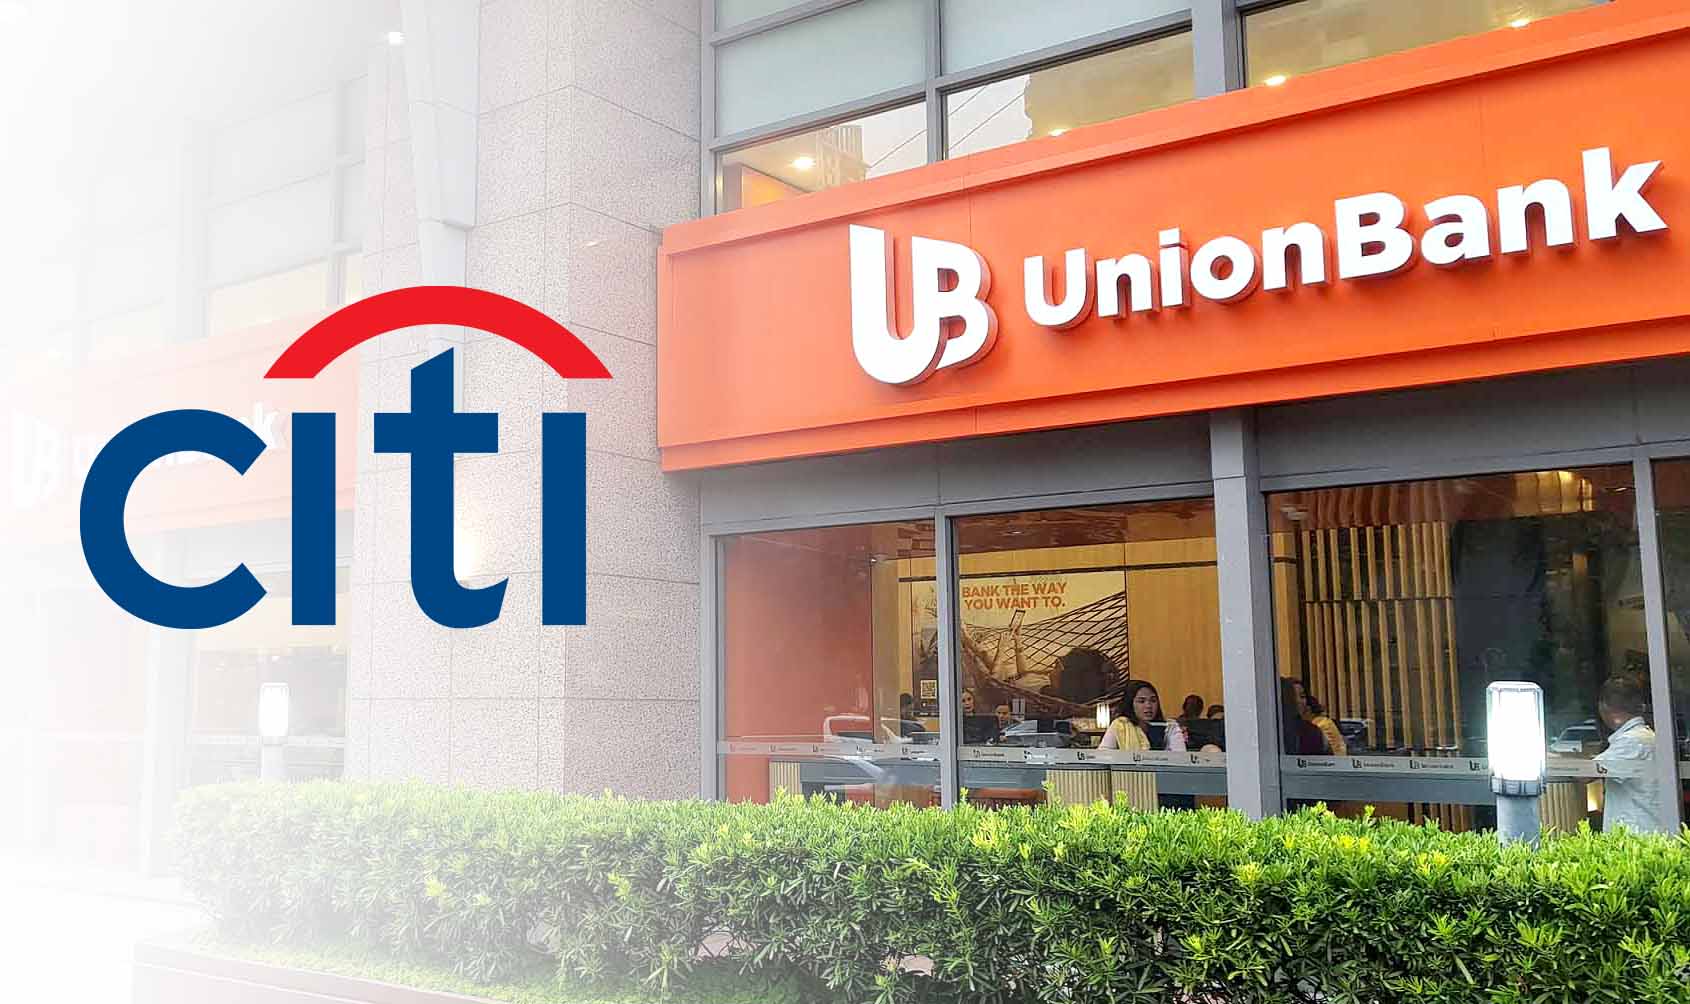 UnionBank’s Citigroup consumer banking business acquisition to further transform banking arm ? AEV